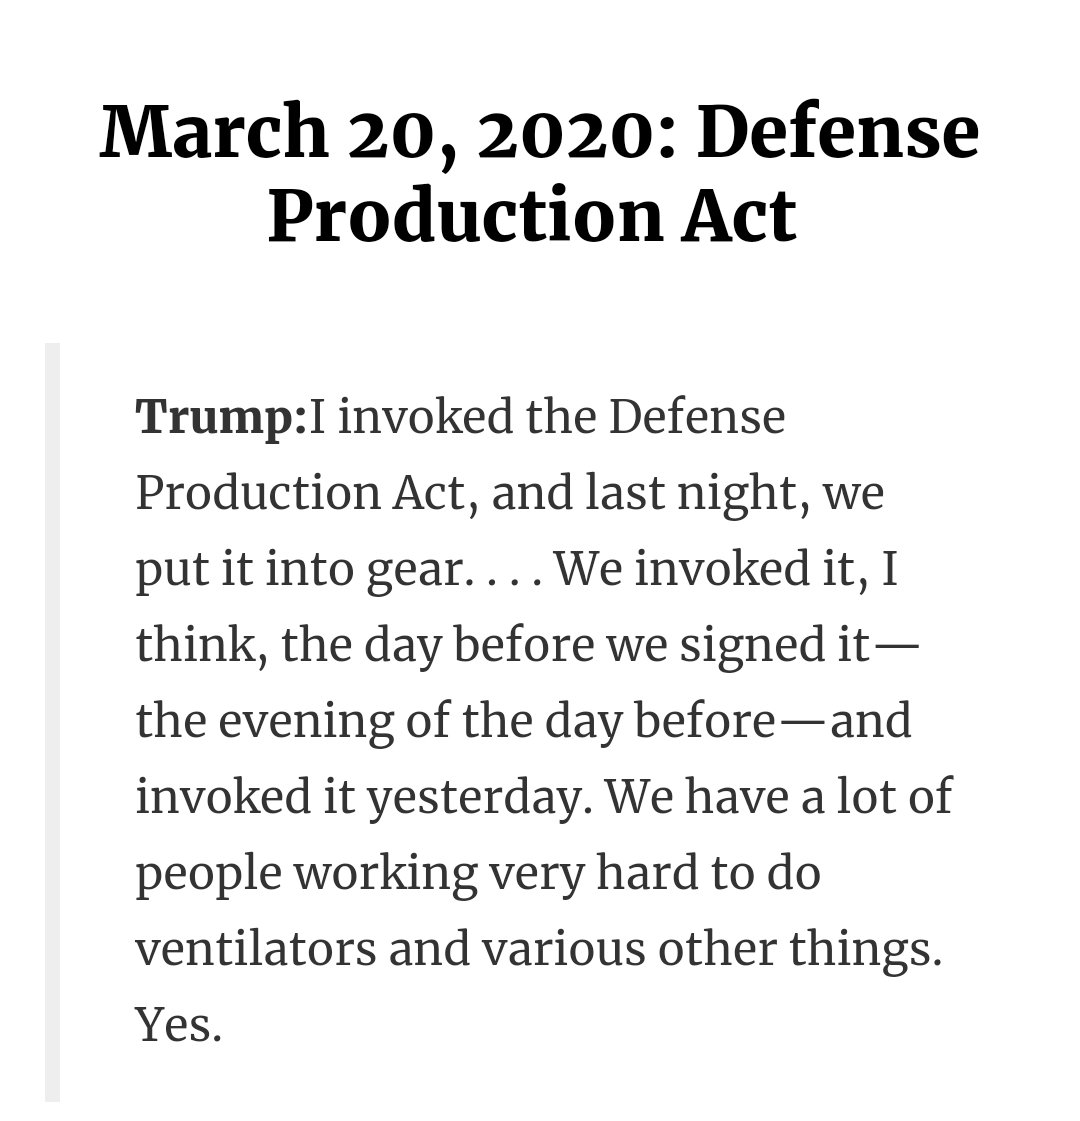 Putting aside that I'm not sure trump knows what "invoked" means, this lie is a REAL doozy considering he's been using this act to feed ICE everything they need over the usual business of companies for years now.Which we JUST found out mind you, so he was doing it in SECRET.